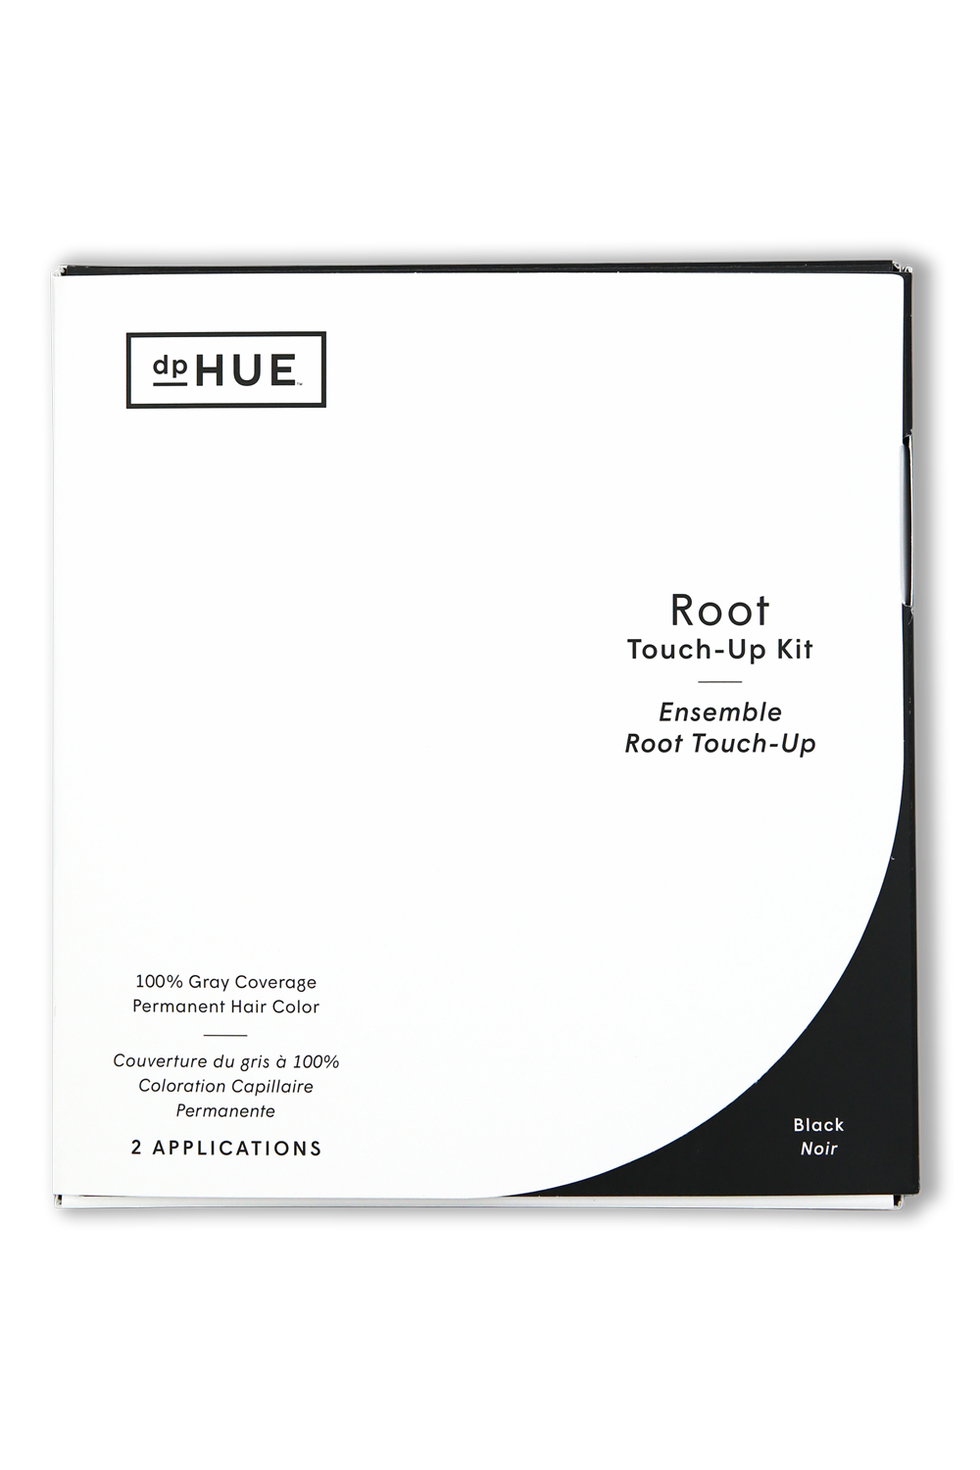 Root Touch-Up Kit